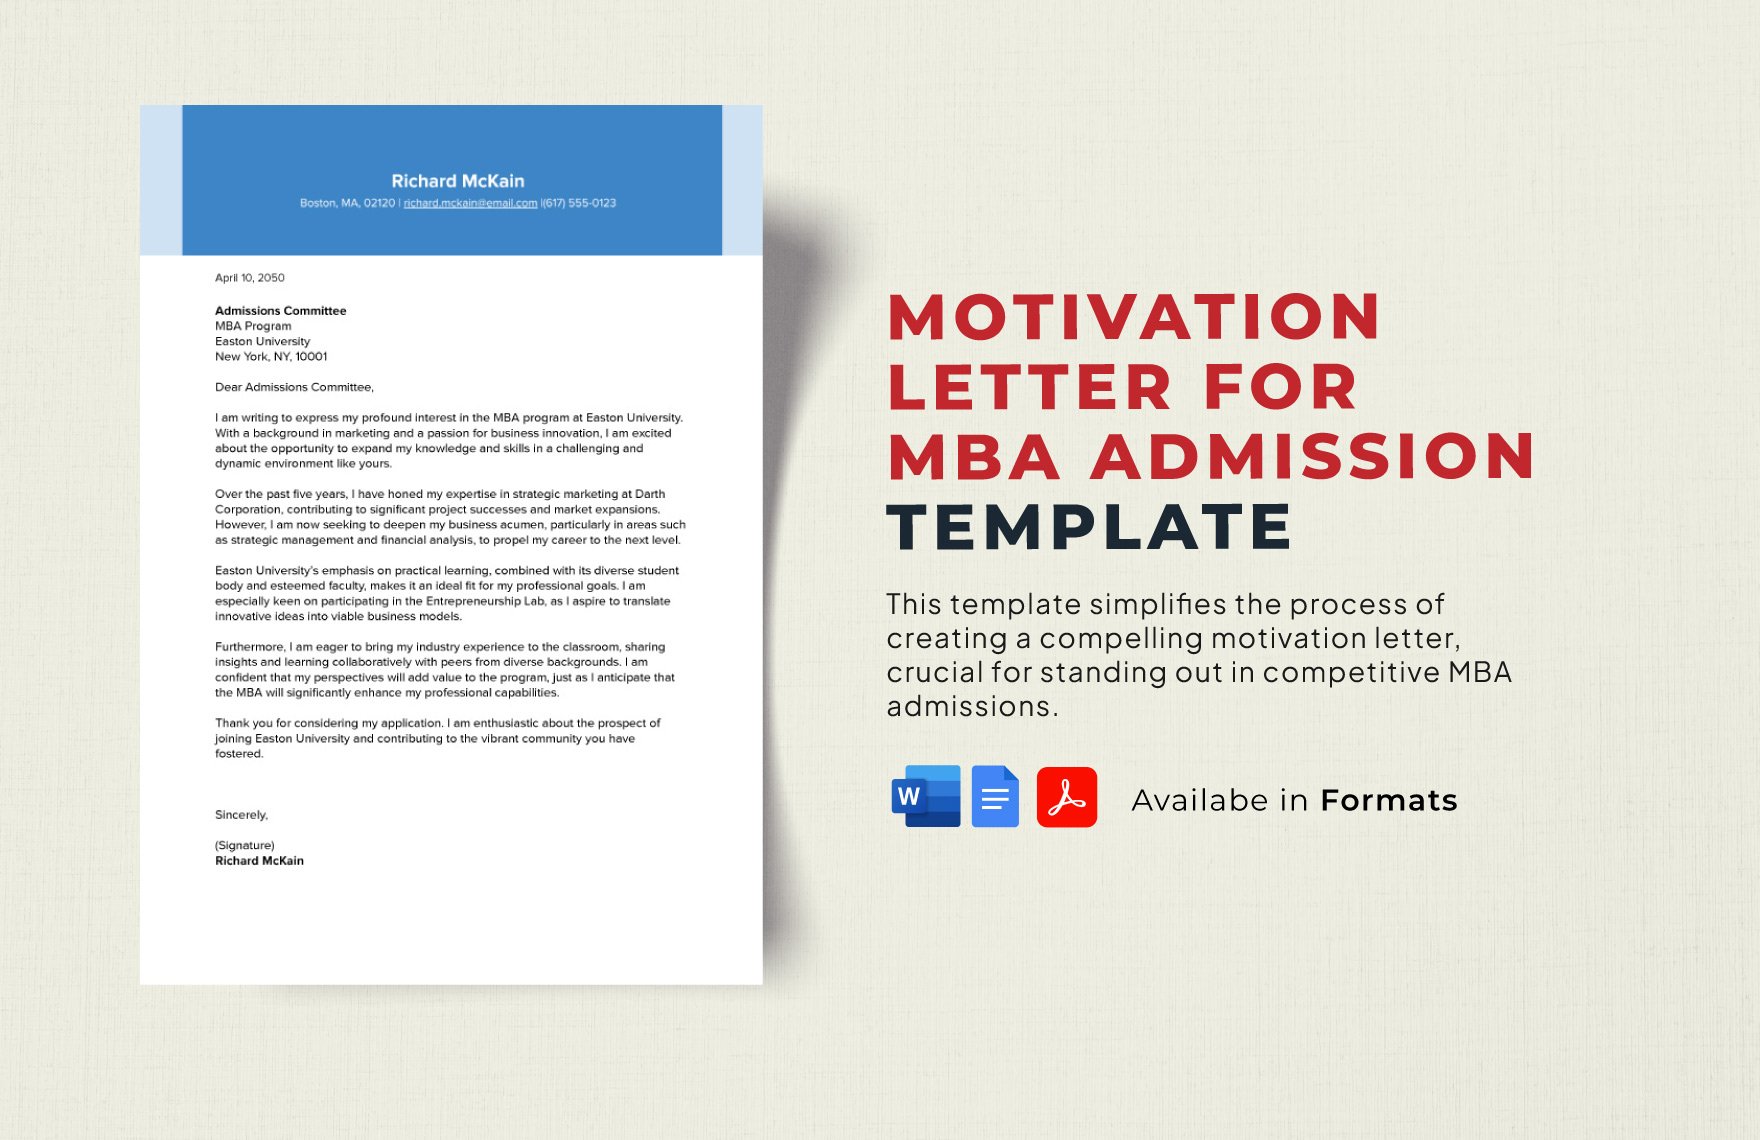 Motivation Letter for MBA Admission Template